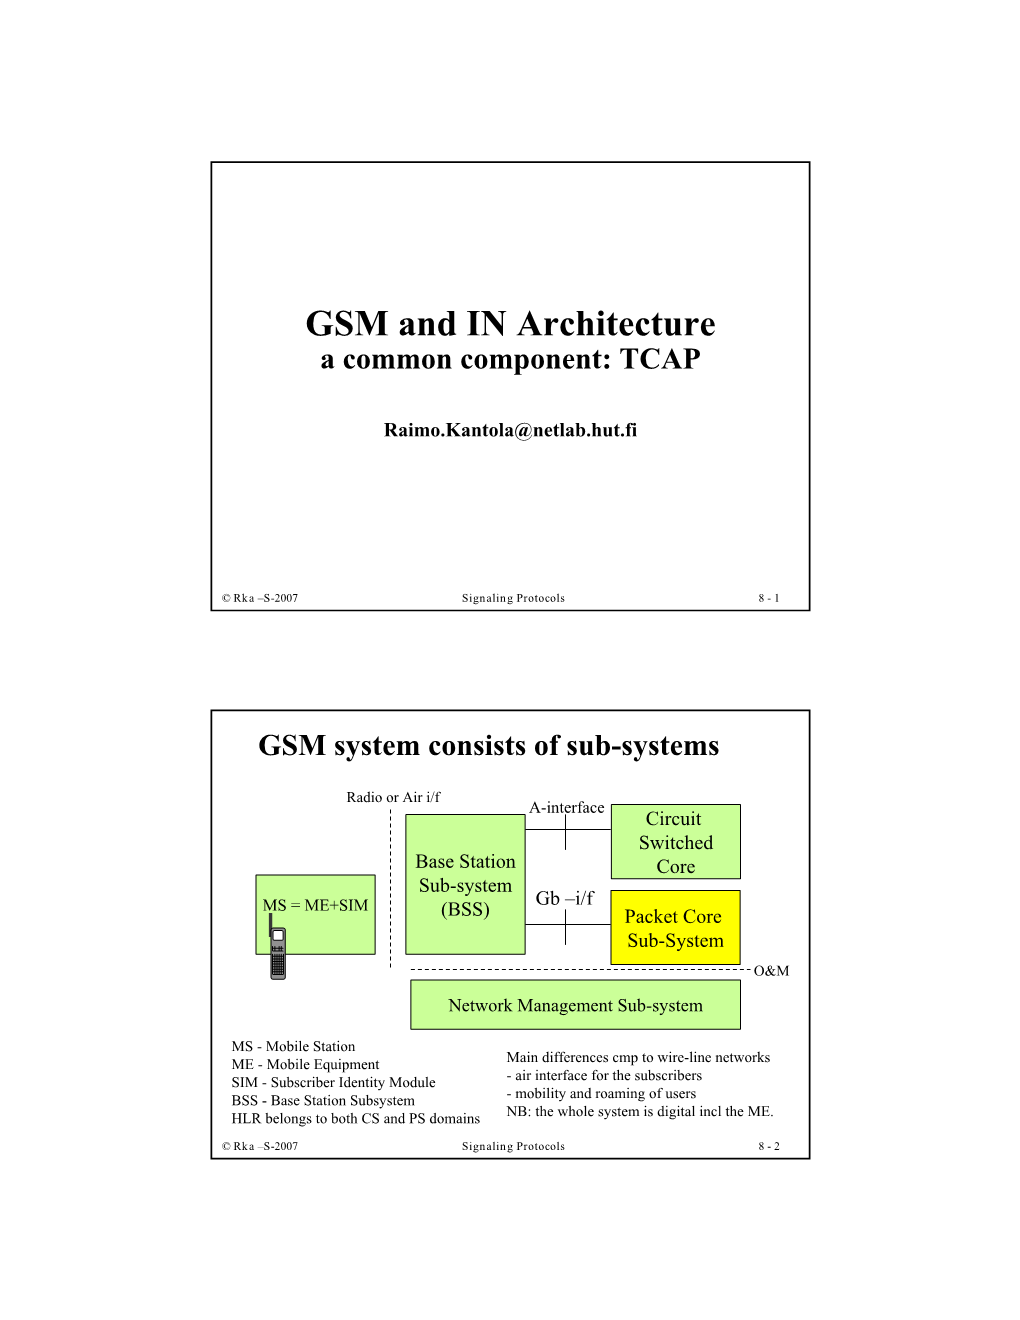 GSM and in Architecture a Common Component: TCAP